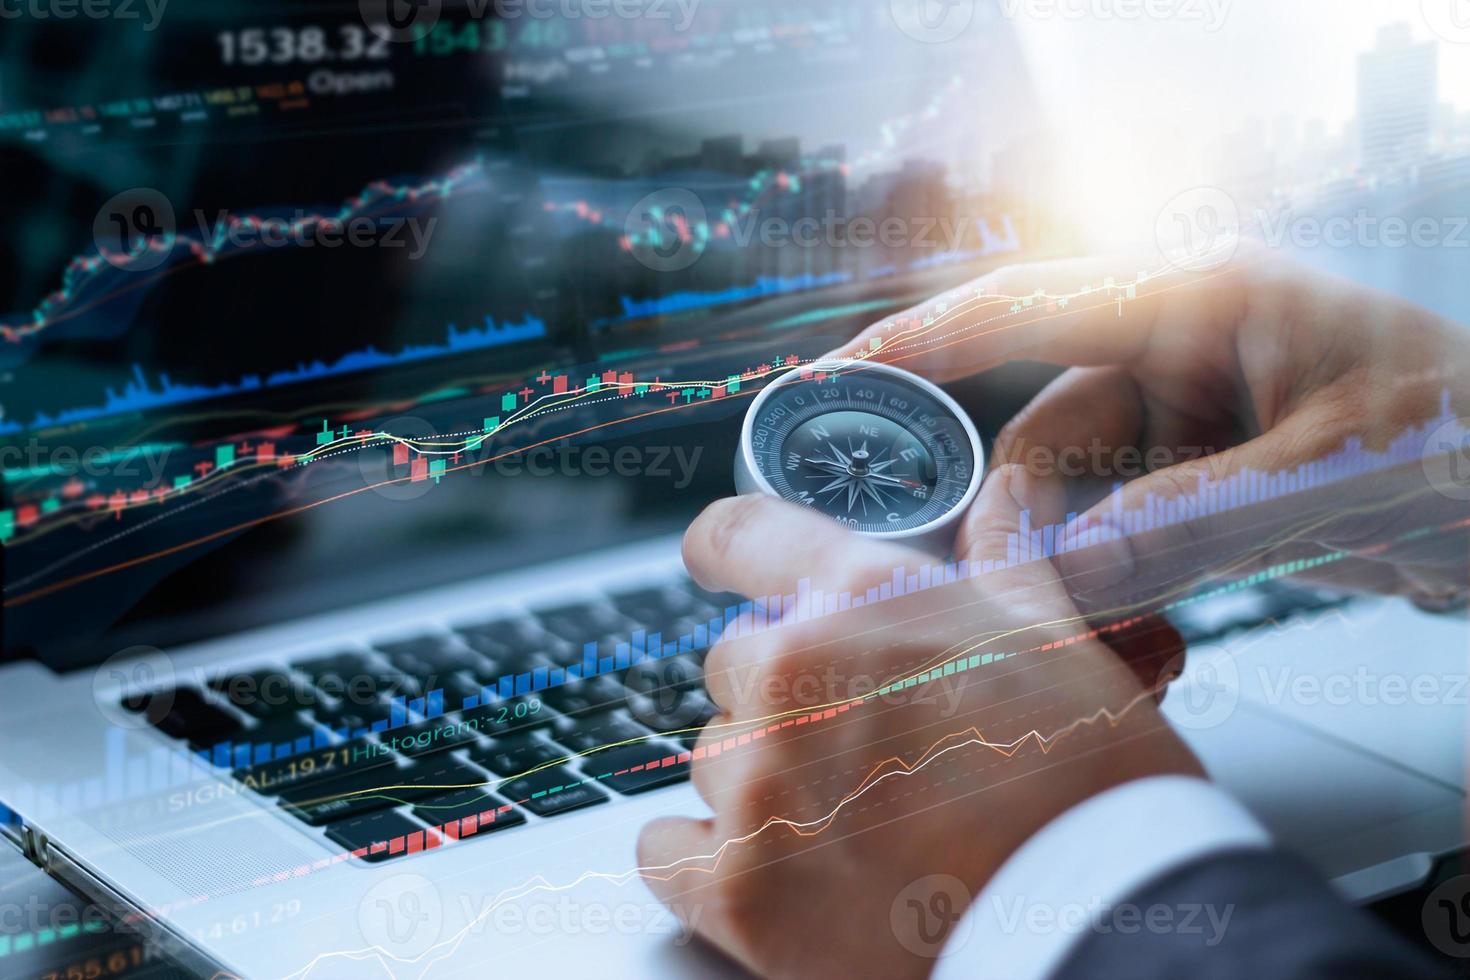 Businessman holding compass in hands, and data analyzing with using laptop stock market graph on screen, finance data and technology concept photo